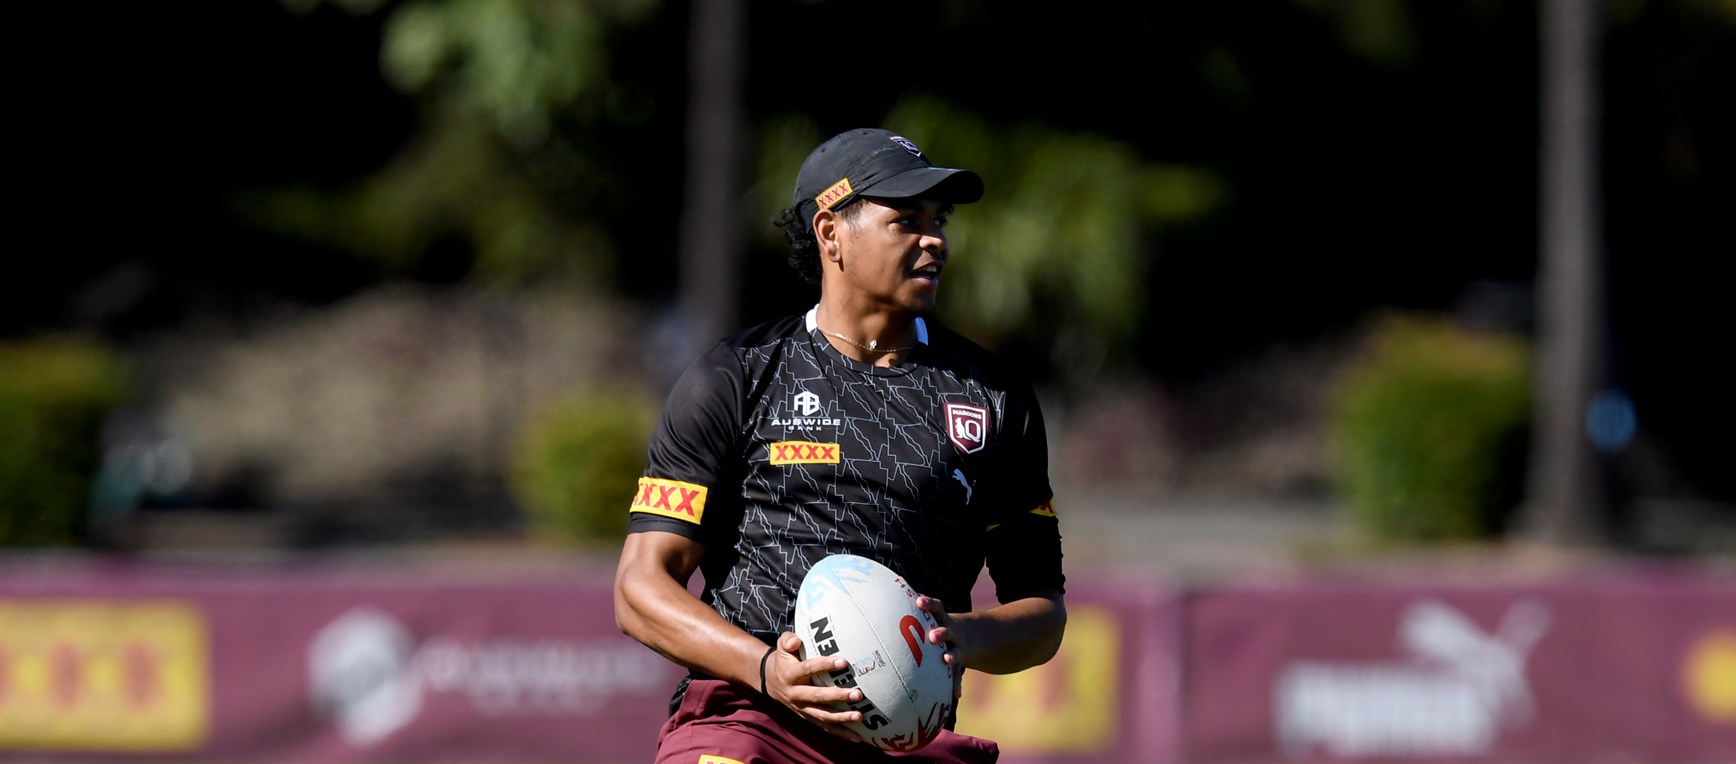 In pictures: Big session for the Maroons